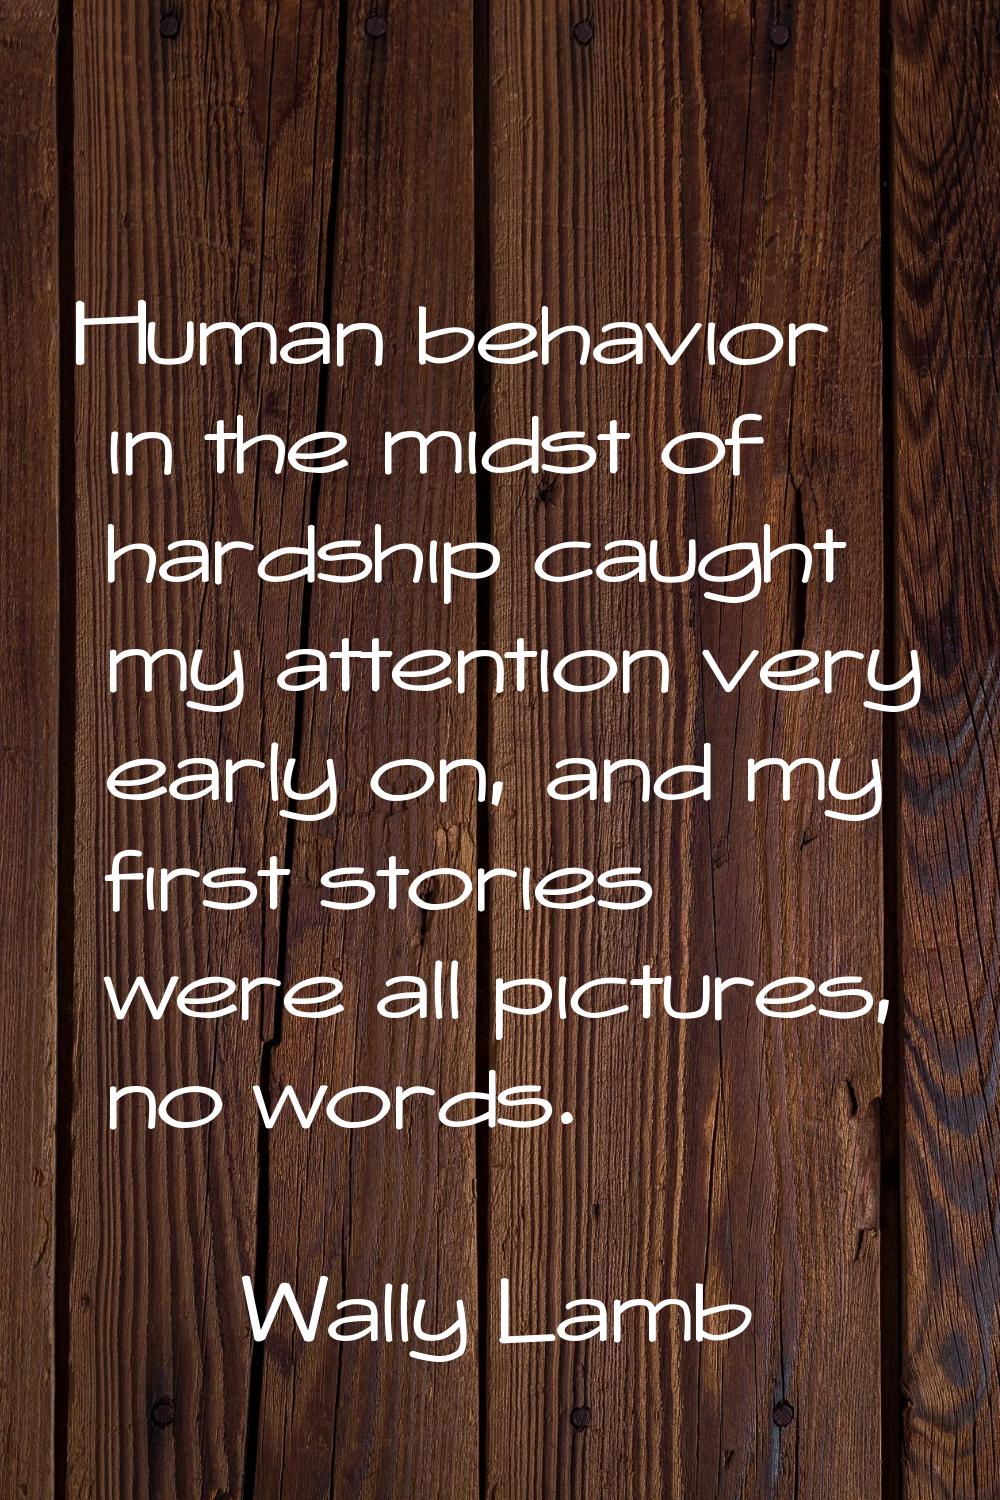 Human behavior in the midst of hardship caught my attention very early on, and my first stories wer